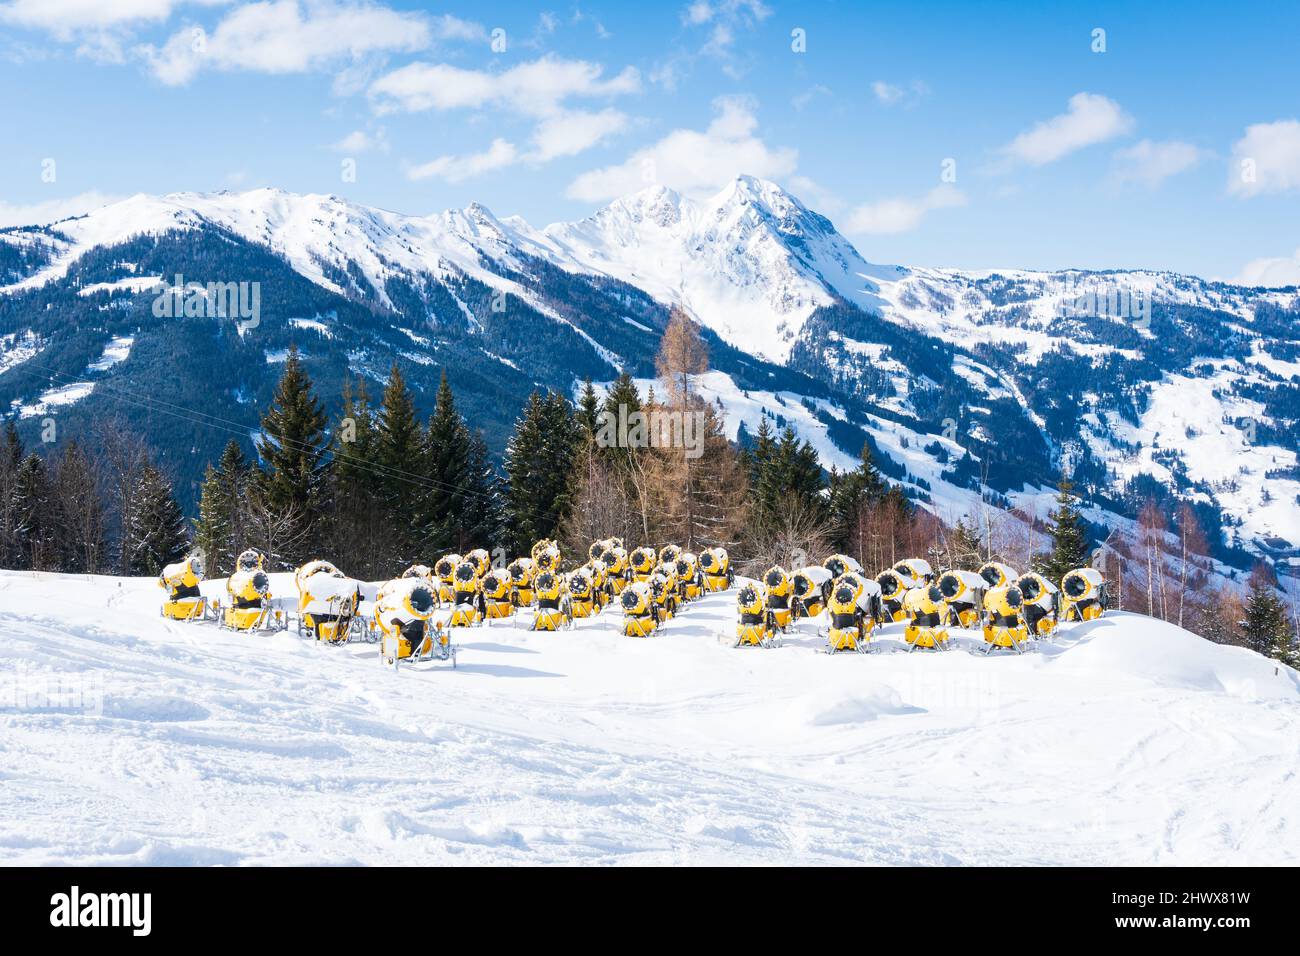 https://c8.alamy.com/comp/2HWX81W/snow-cannon-to-make-artificial-snow-at-the-skiing-slope-use-of-technology-to-extend-the-winter-season-2HWX81W.jpg